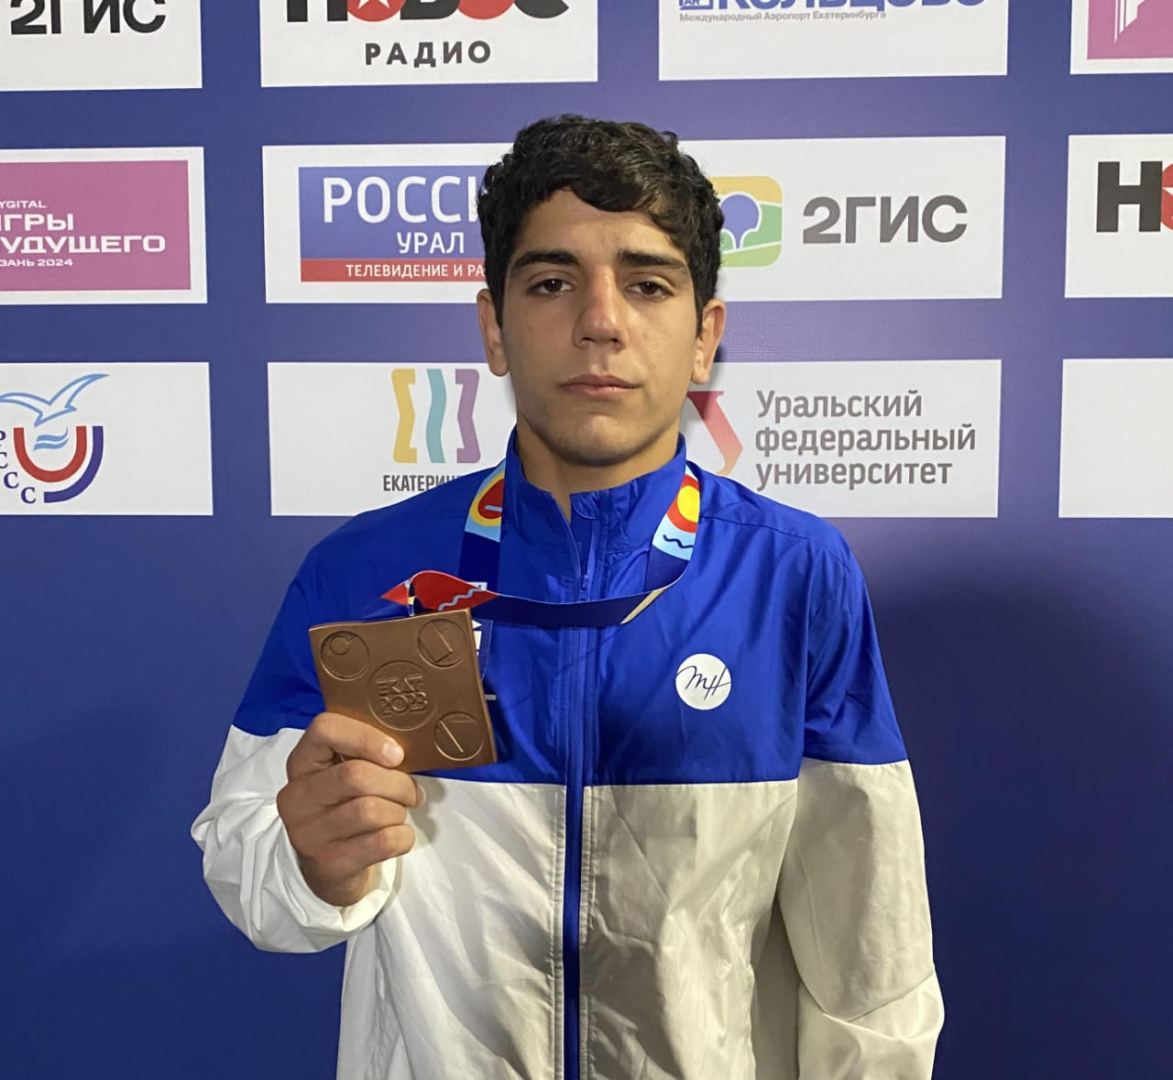 I believe to achieve better results in future, says Azerbaijani athlete